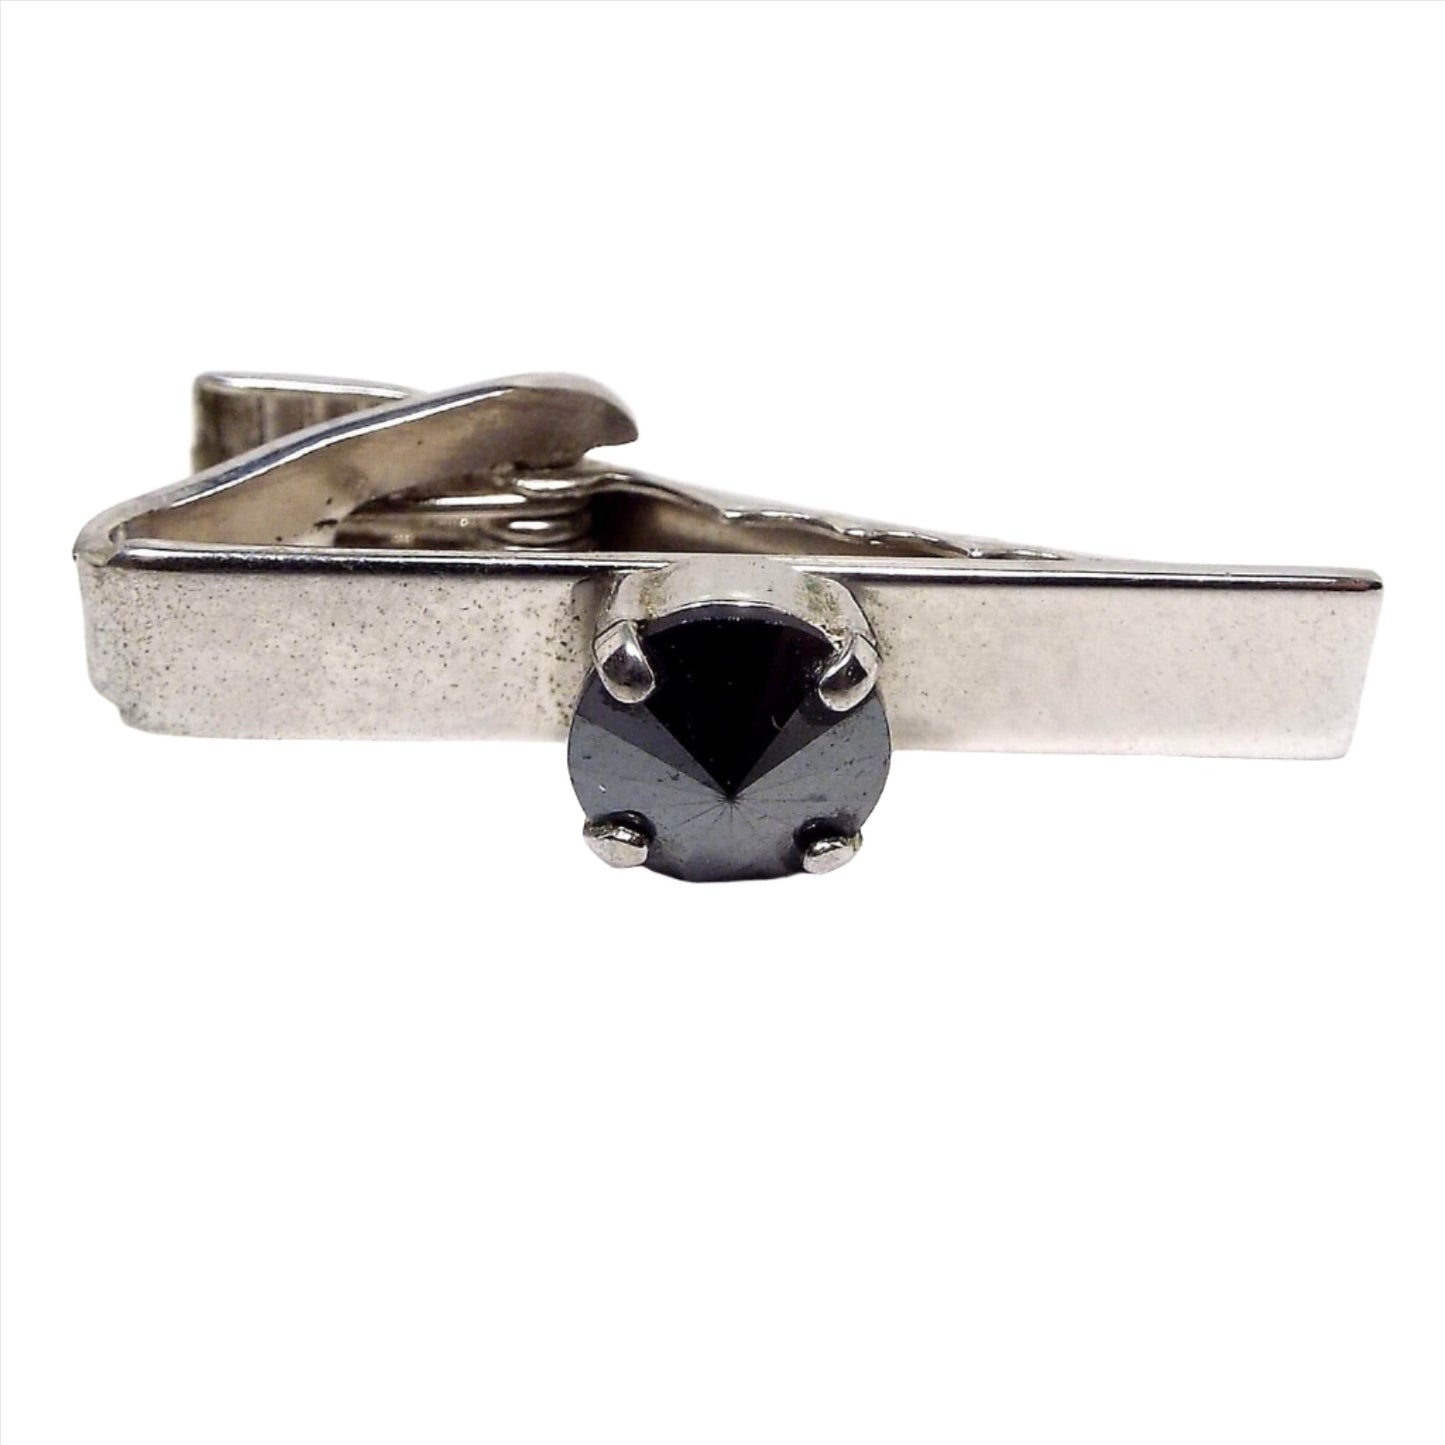 Front view of the Mid Century vintage faux hematite tie clip. The metal is silver tone in color. In the middle is a prong set rivoili rhinestone that is dark metallic gray in color.